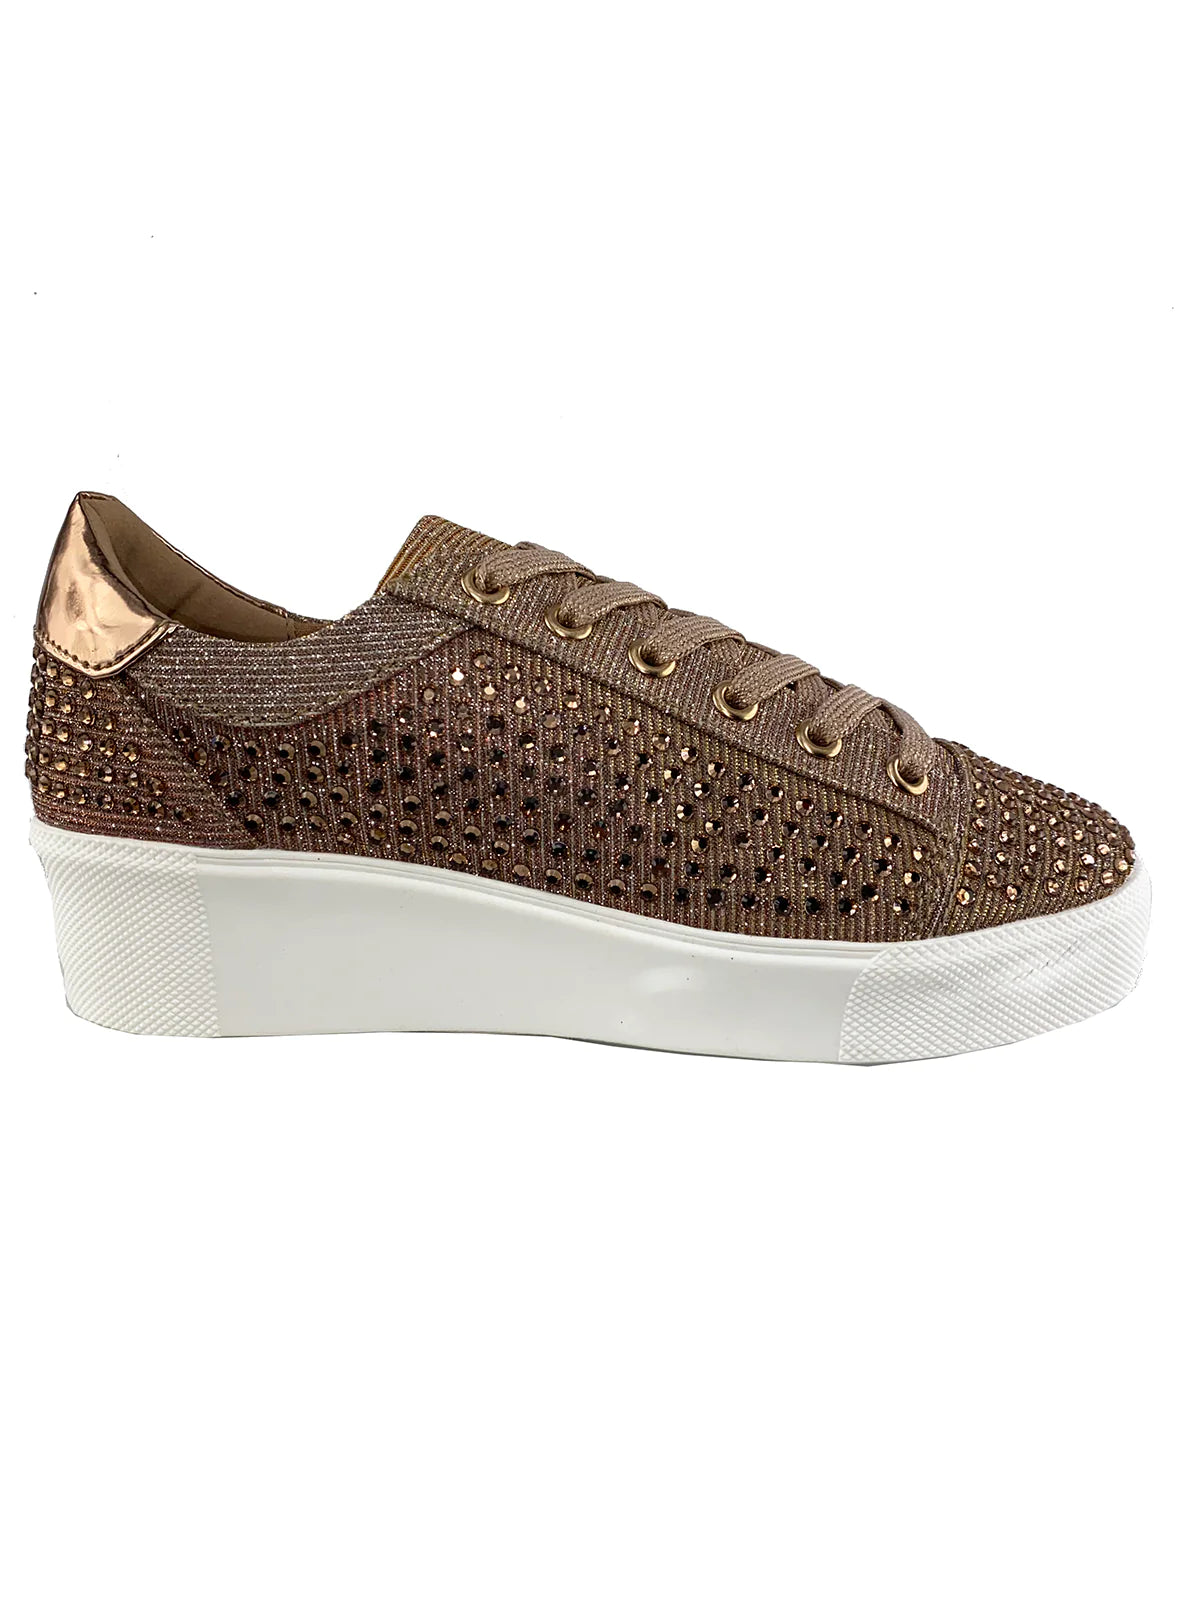 Not Rated Diva Sparkle Sneakers in Rose Gold at ooh la la! in Grapevine TX 76051